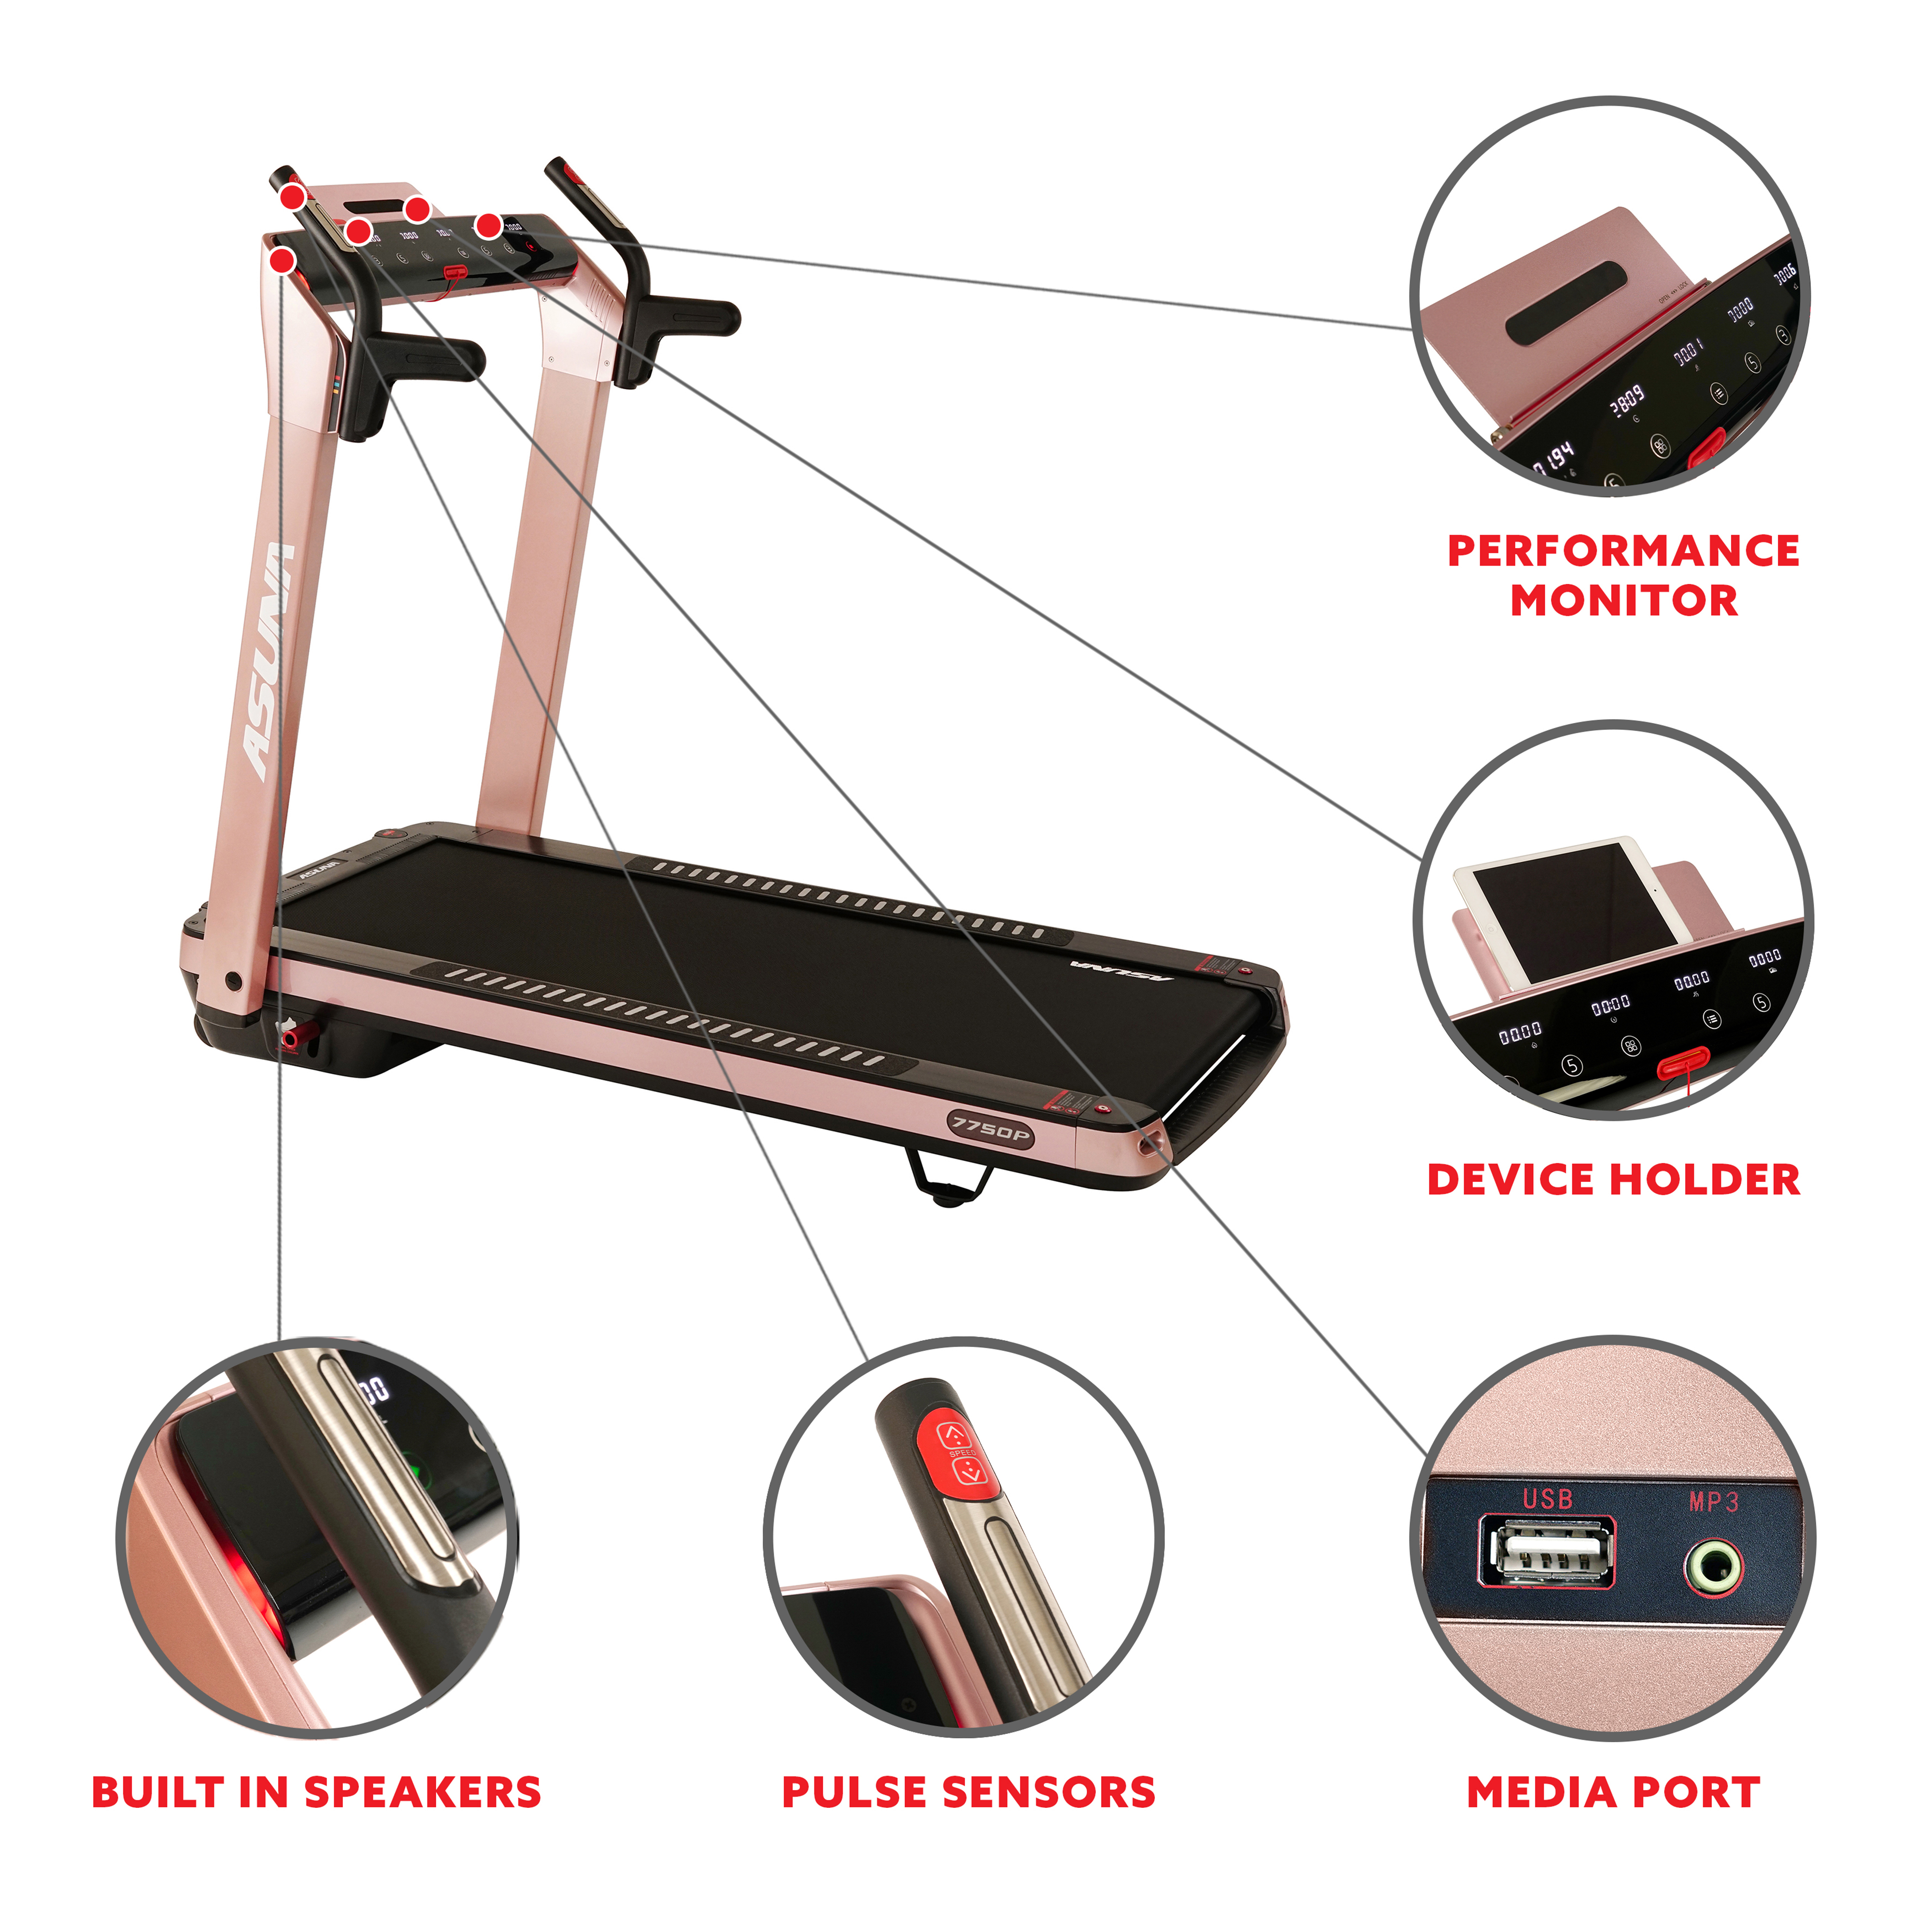 ASUNA SpaceFlex Motorized Treadmill with Auto Incline, Wide Folding Belt - 7750Pink - image 3 of 9